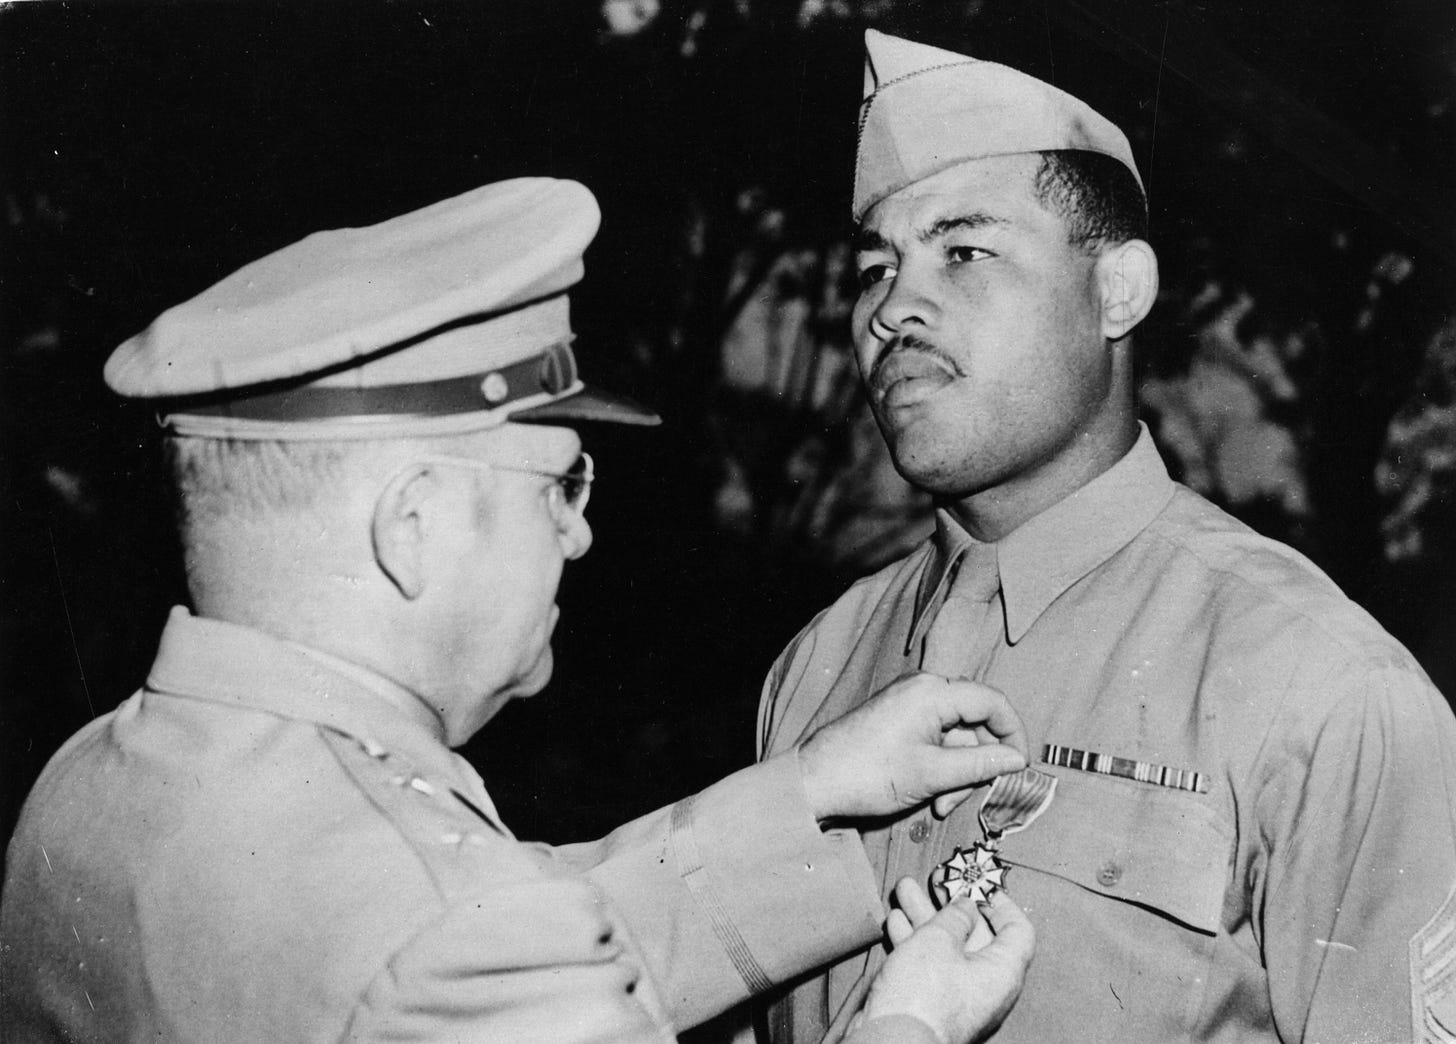 Heavyweight champion Joe Louis receiving a medal for his 'incalculable contribution to the general morale in the US army during the second world war